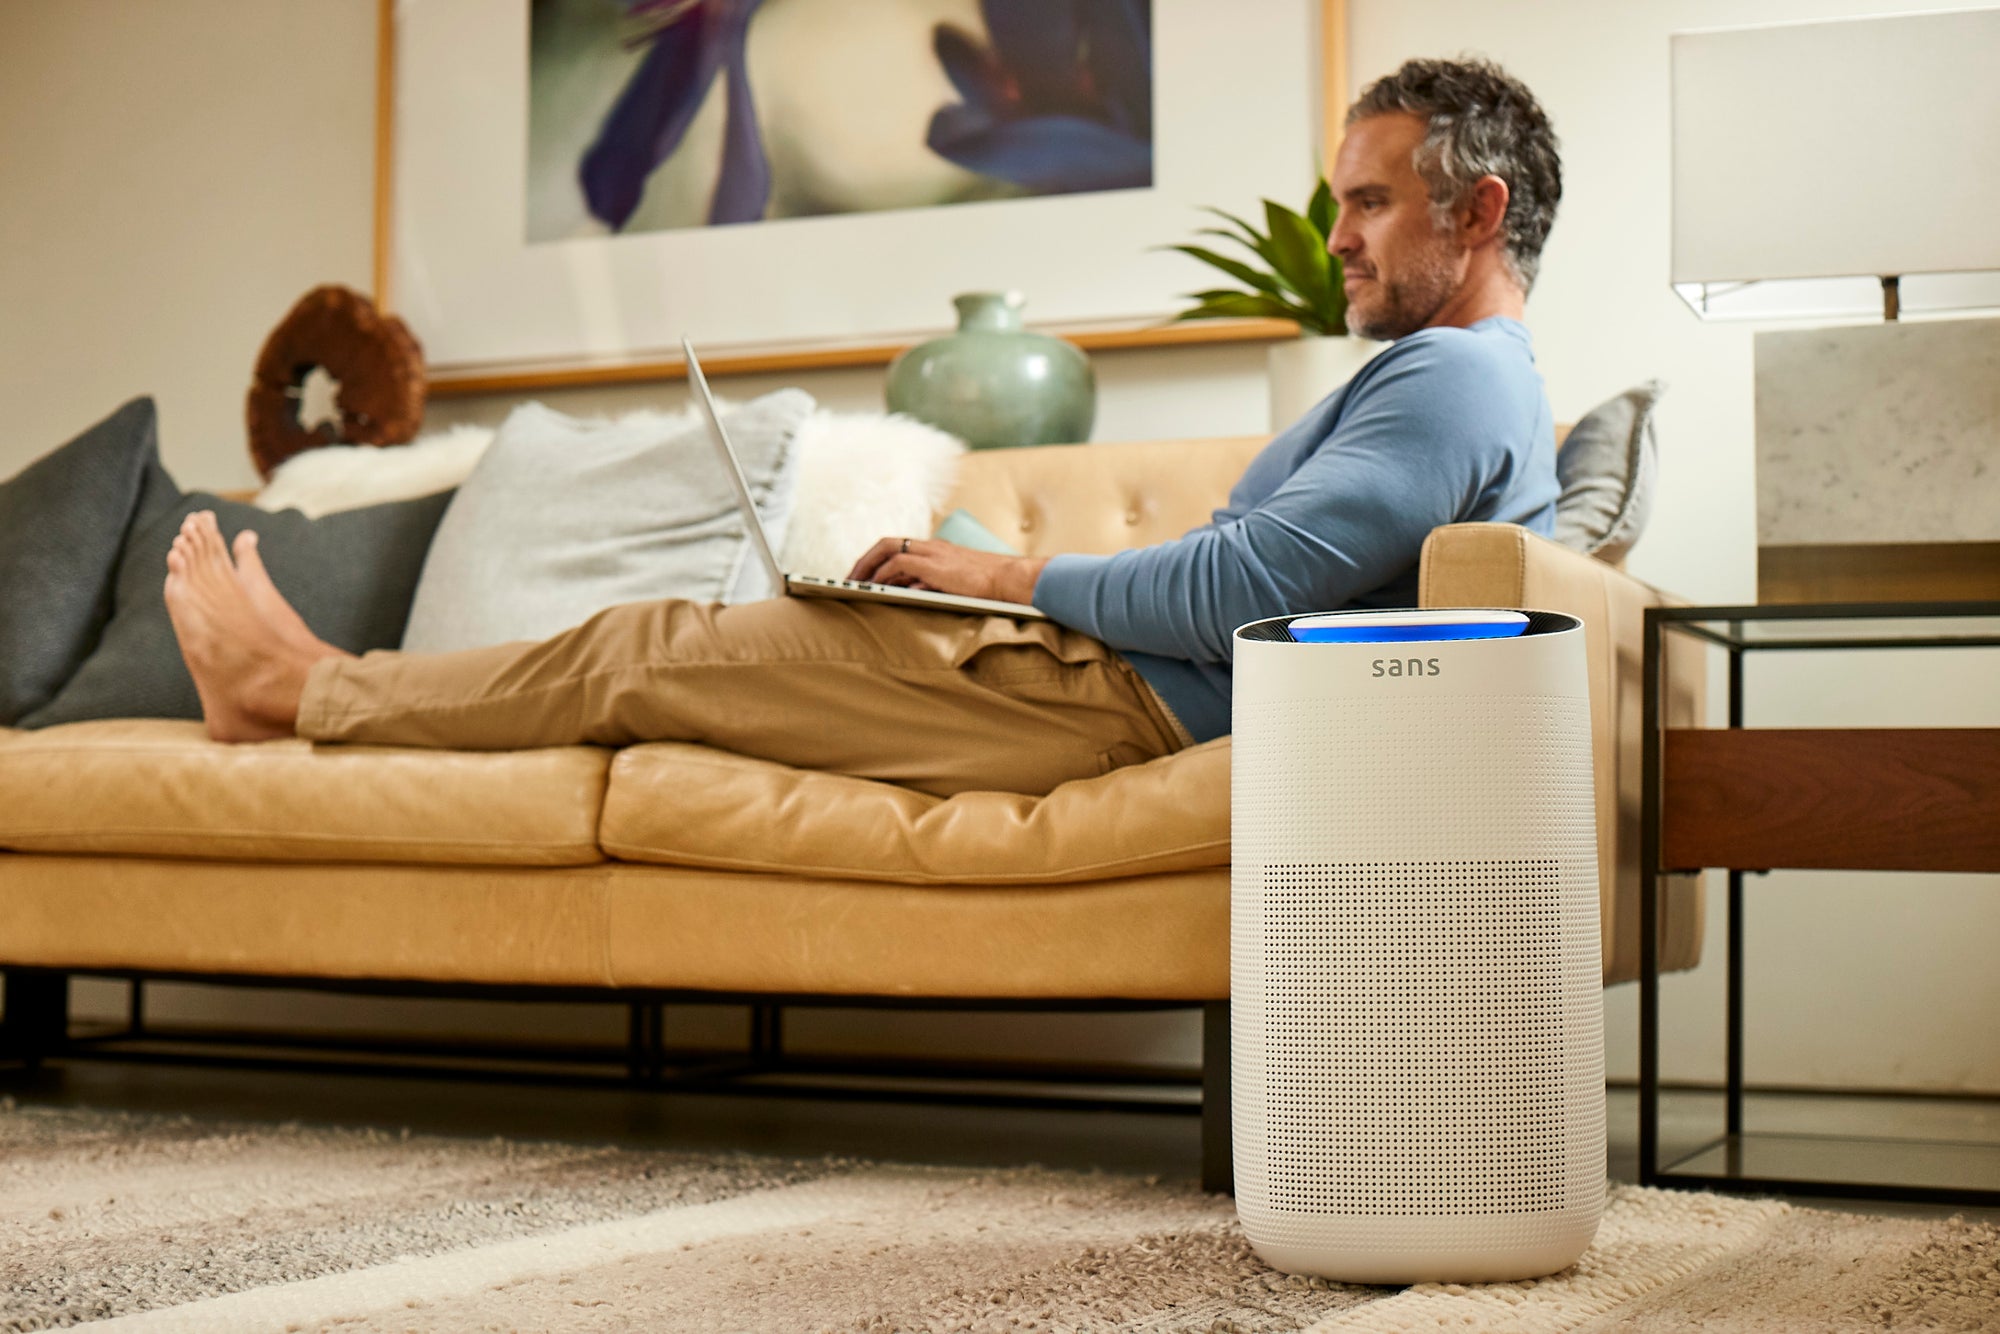 Are Air Purifiers Good for Preventing COVID-19?